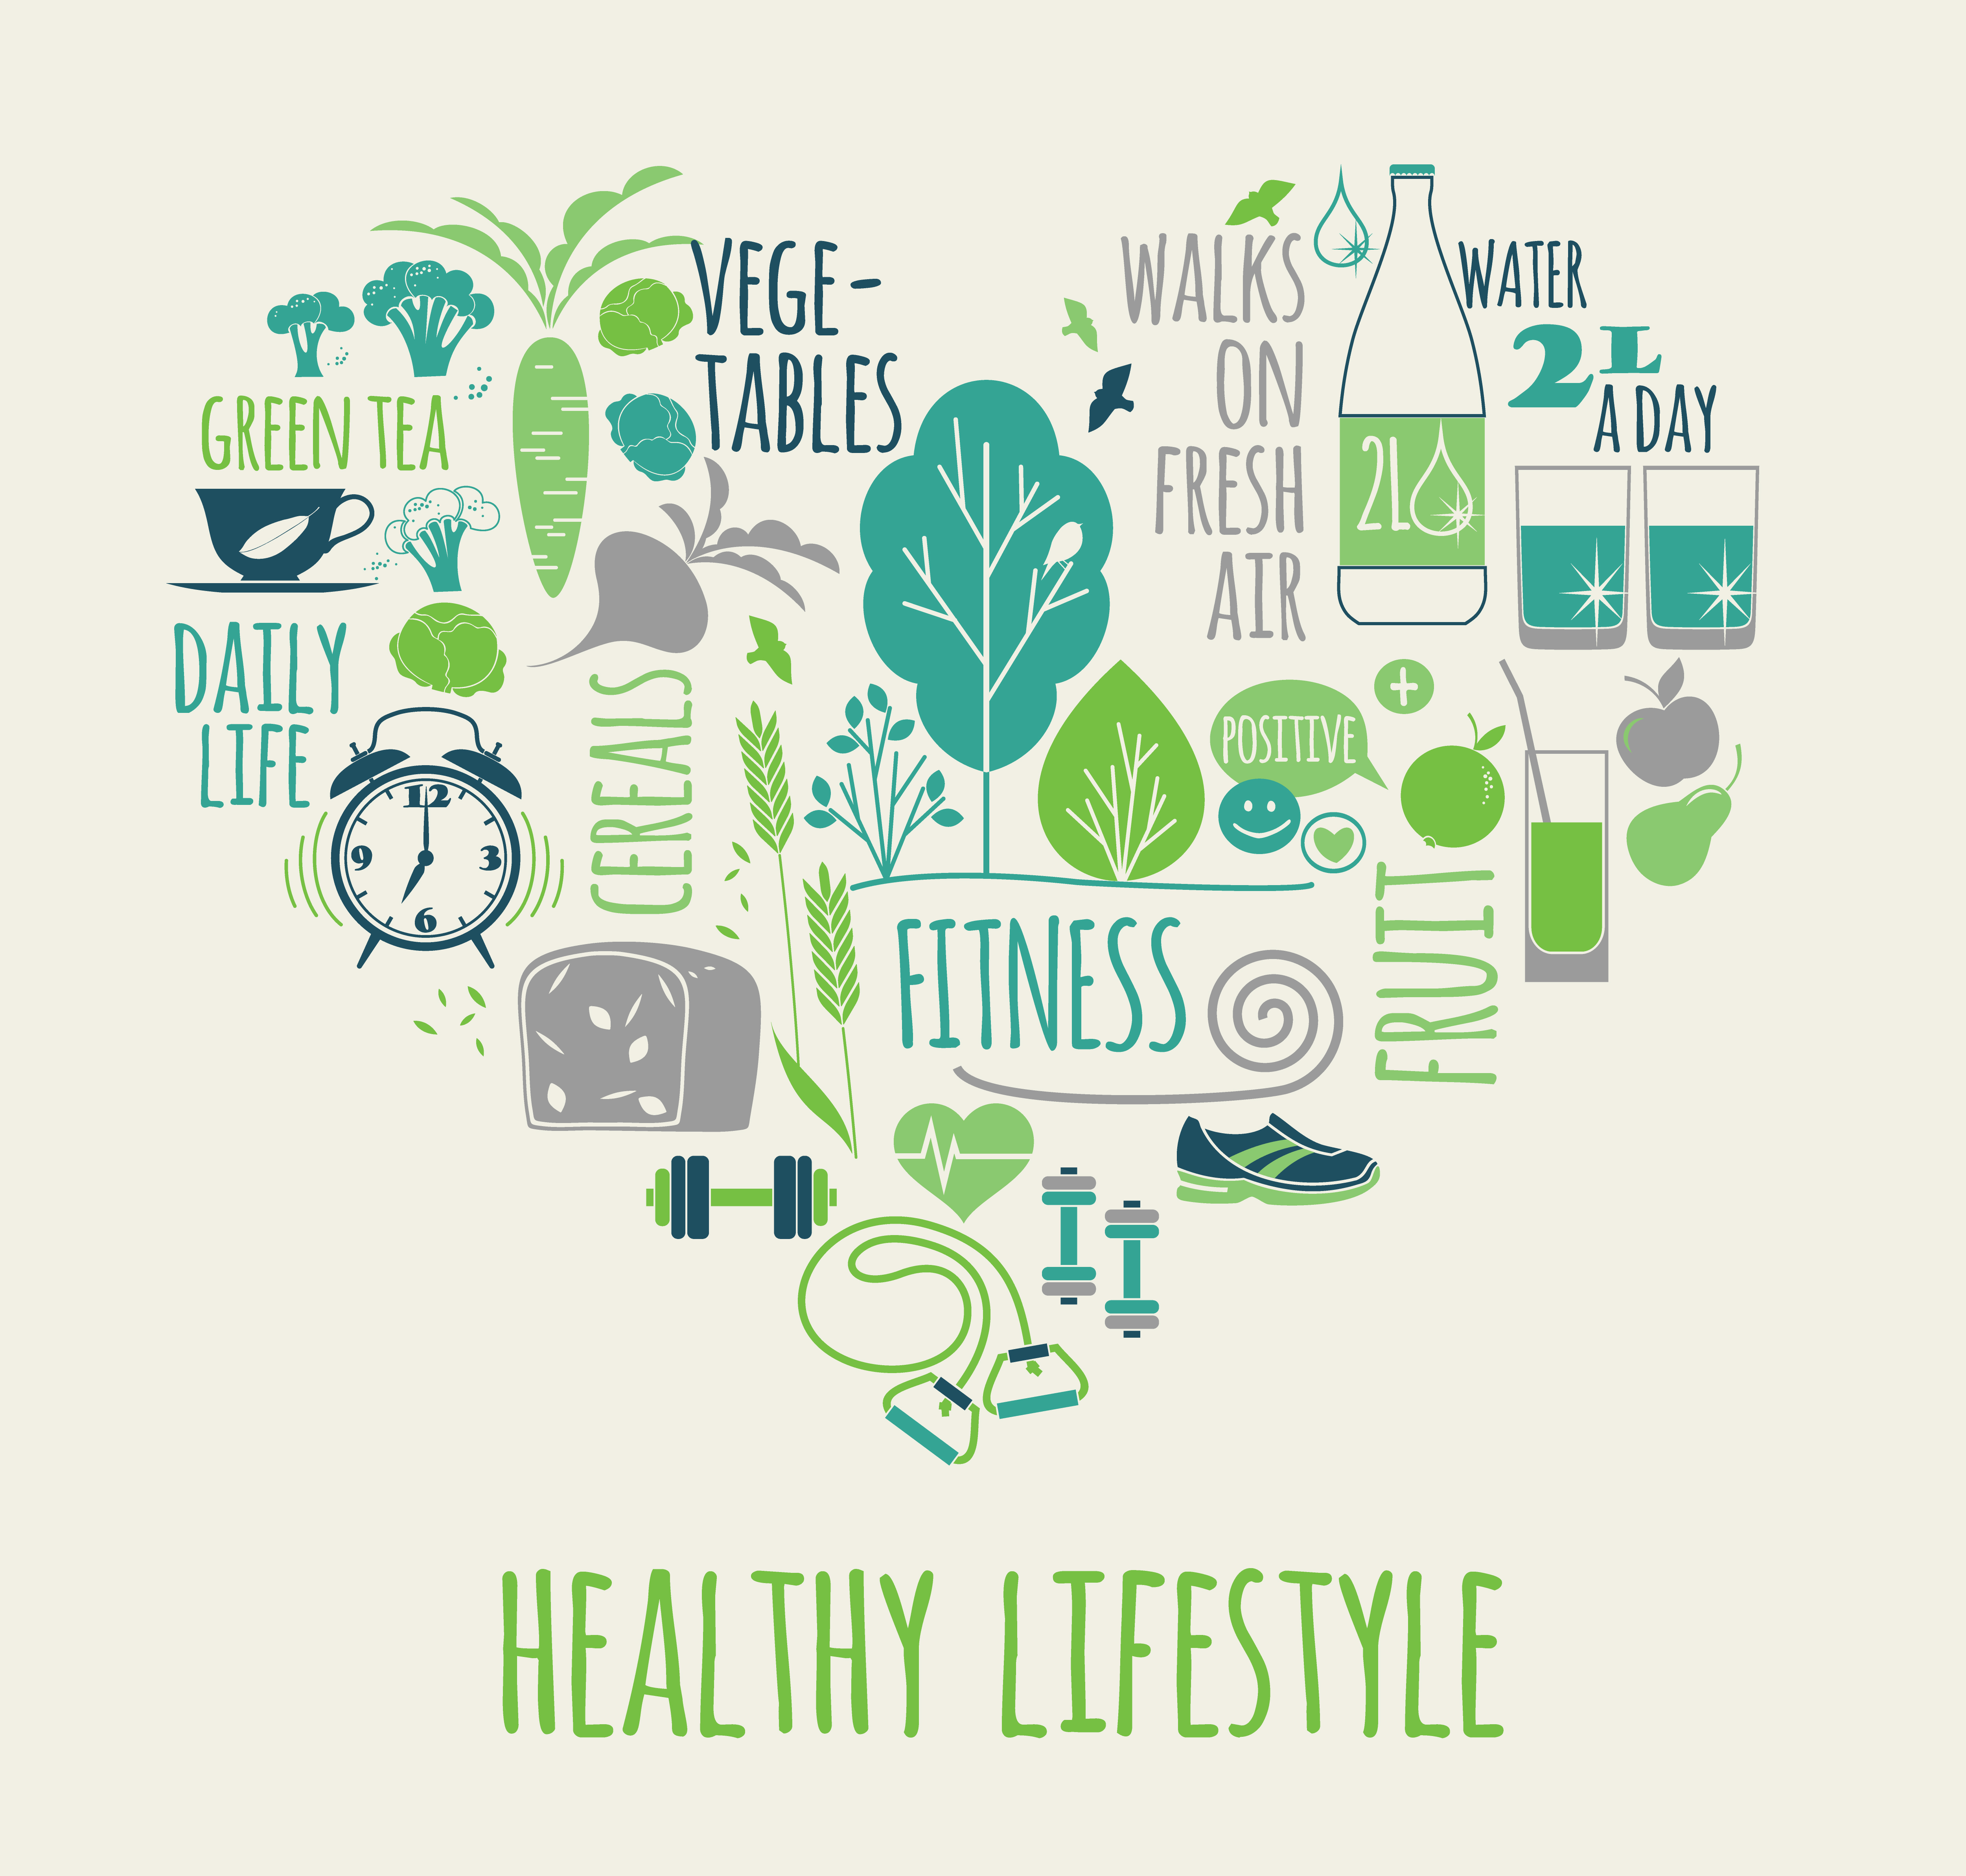 Healthy lifestyle ve